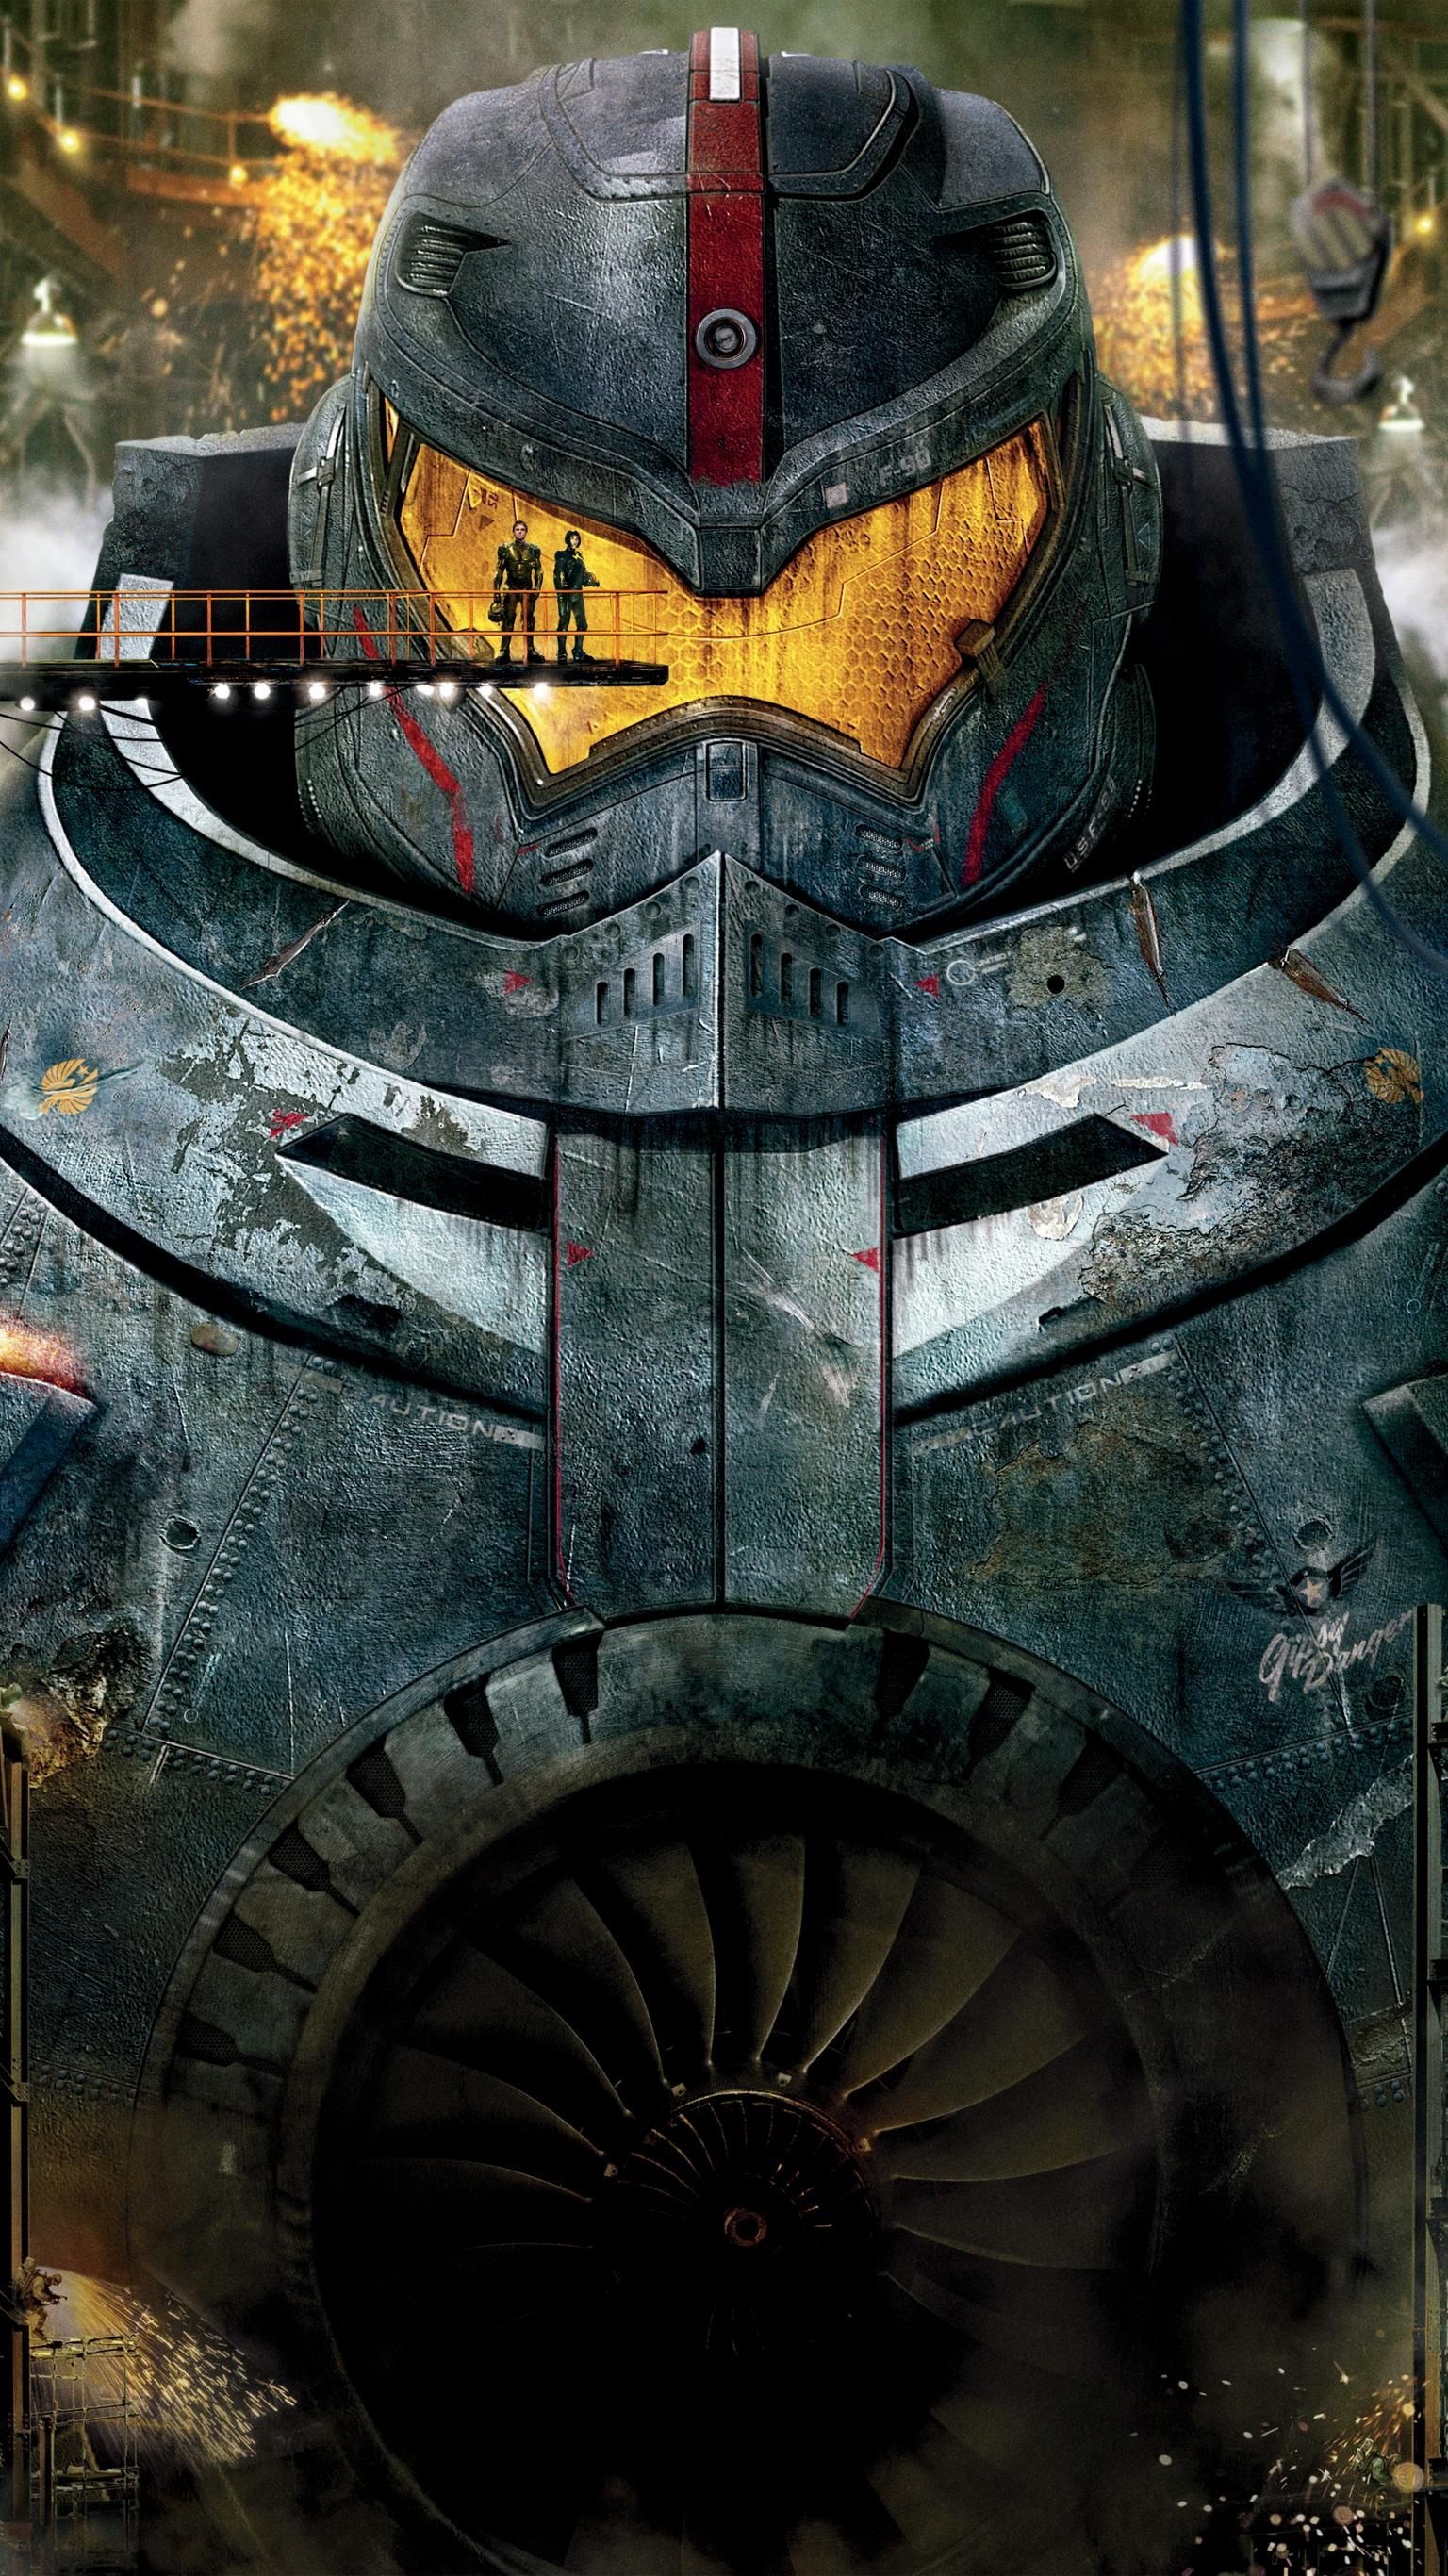 Pacific Rim, Textless movie wallpapers, High resolution, Epic sci-fi, 1540x2740 HD Handy